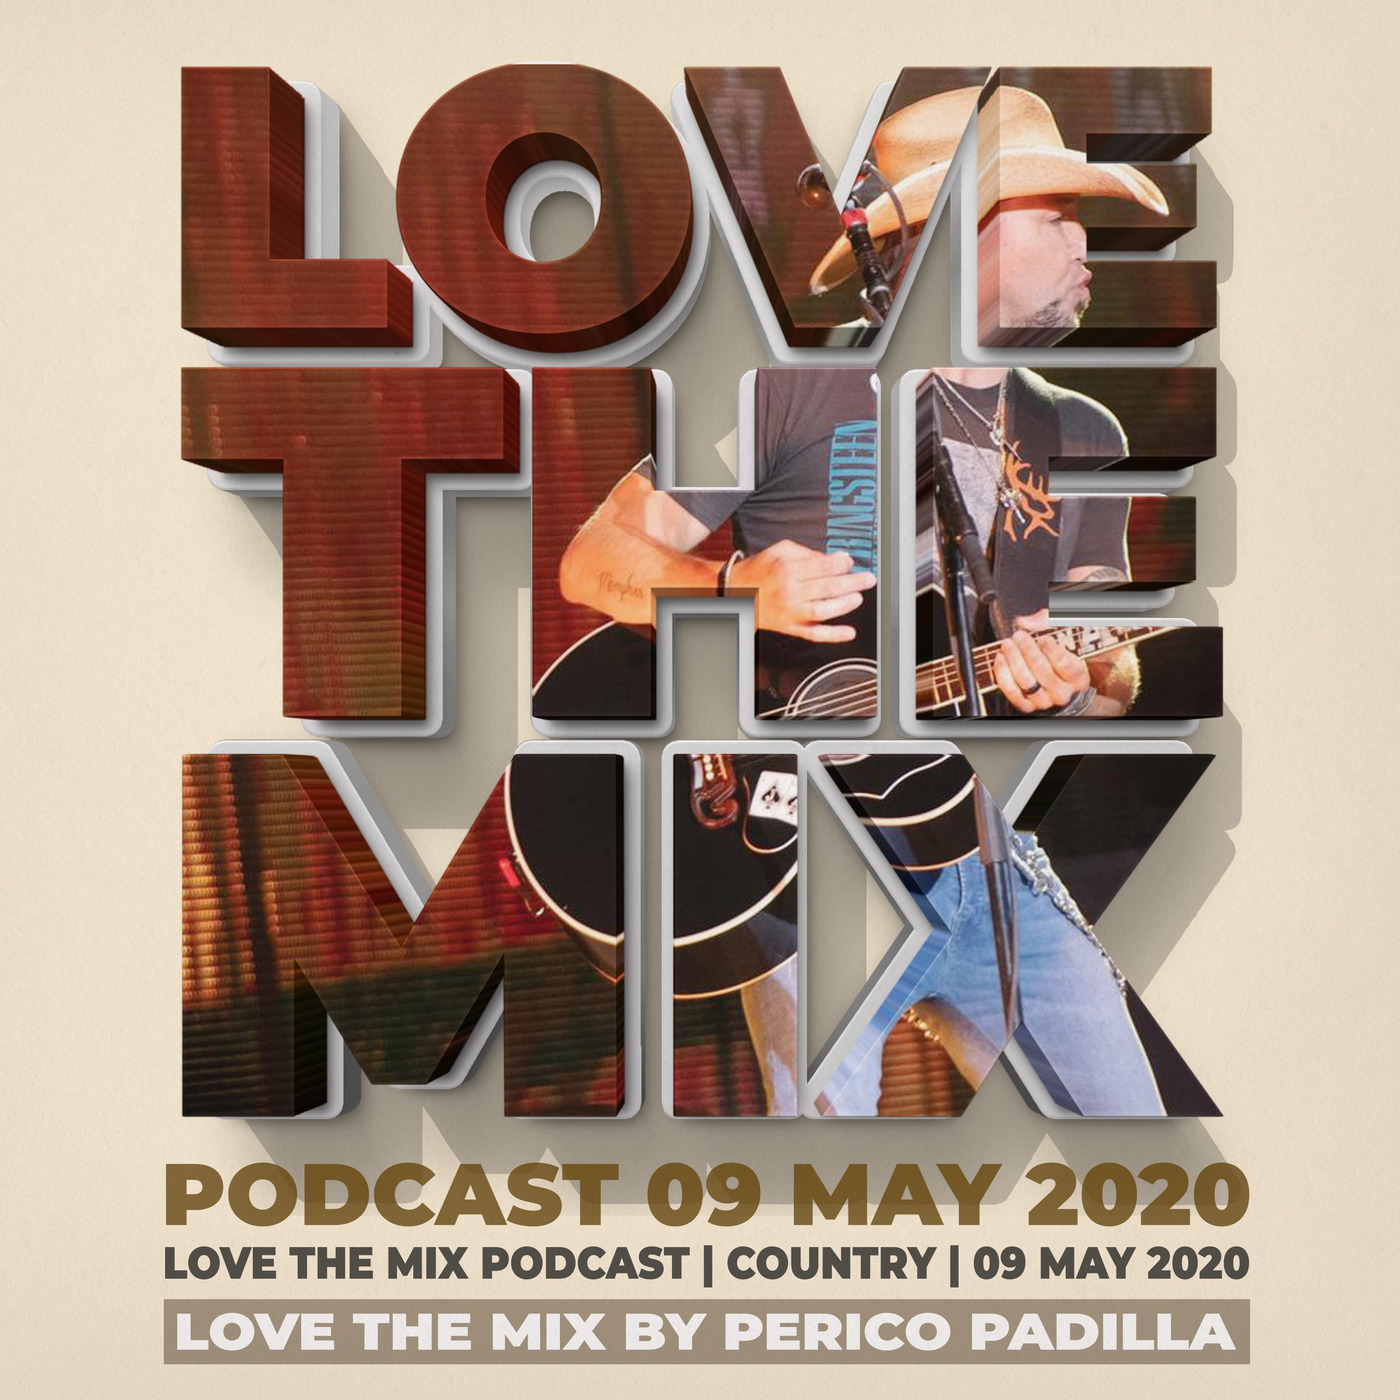 LOVE THE MIX PODCAST | COUNTRY | 09 MAY 2020 By Perico Padilla